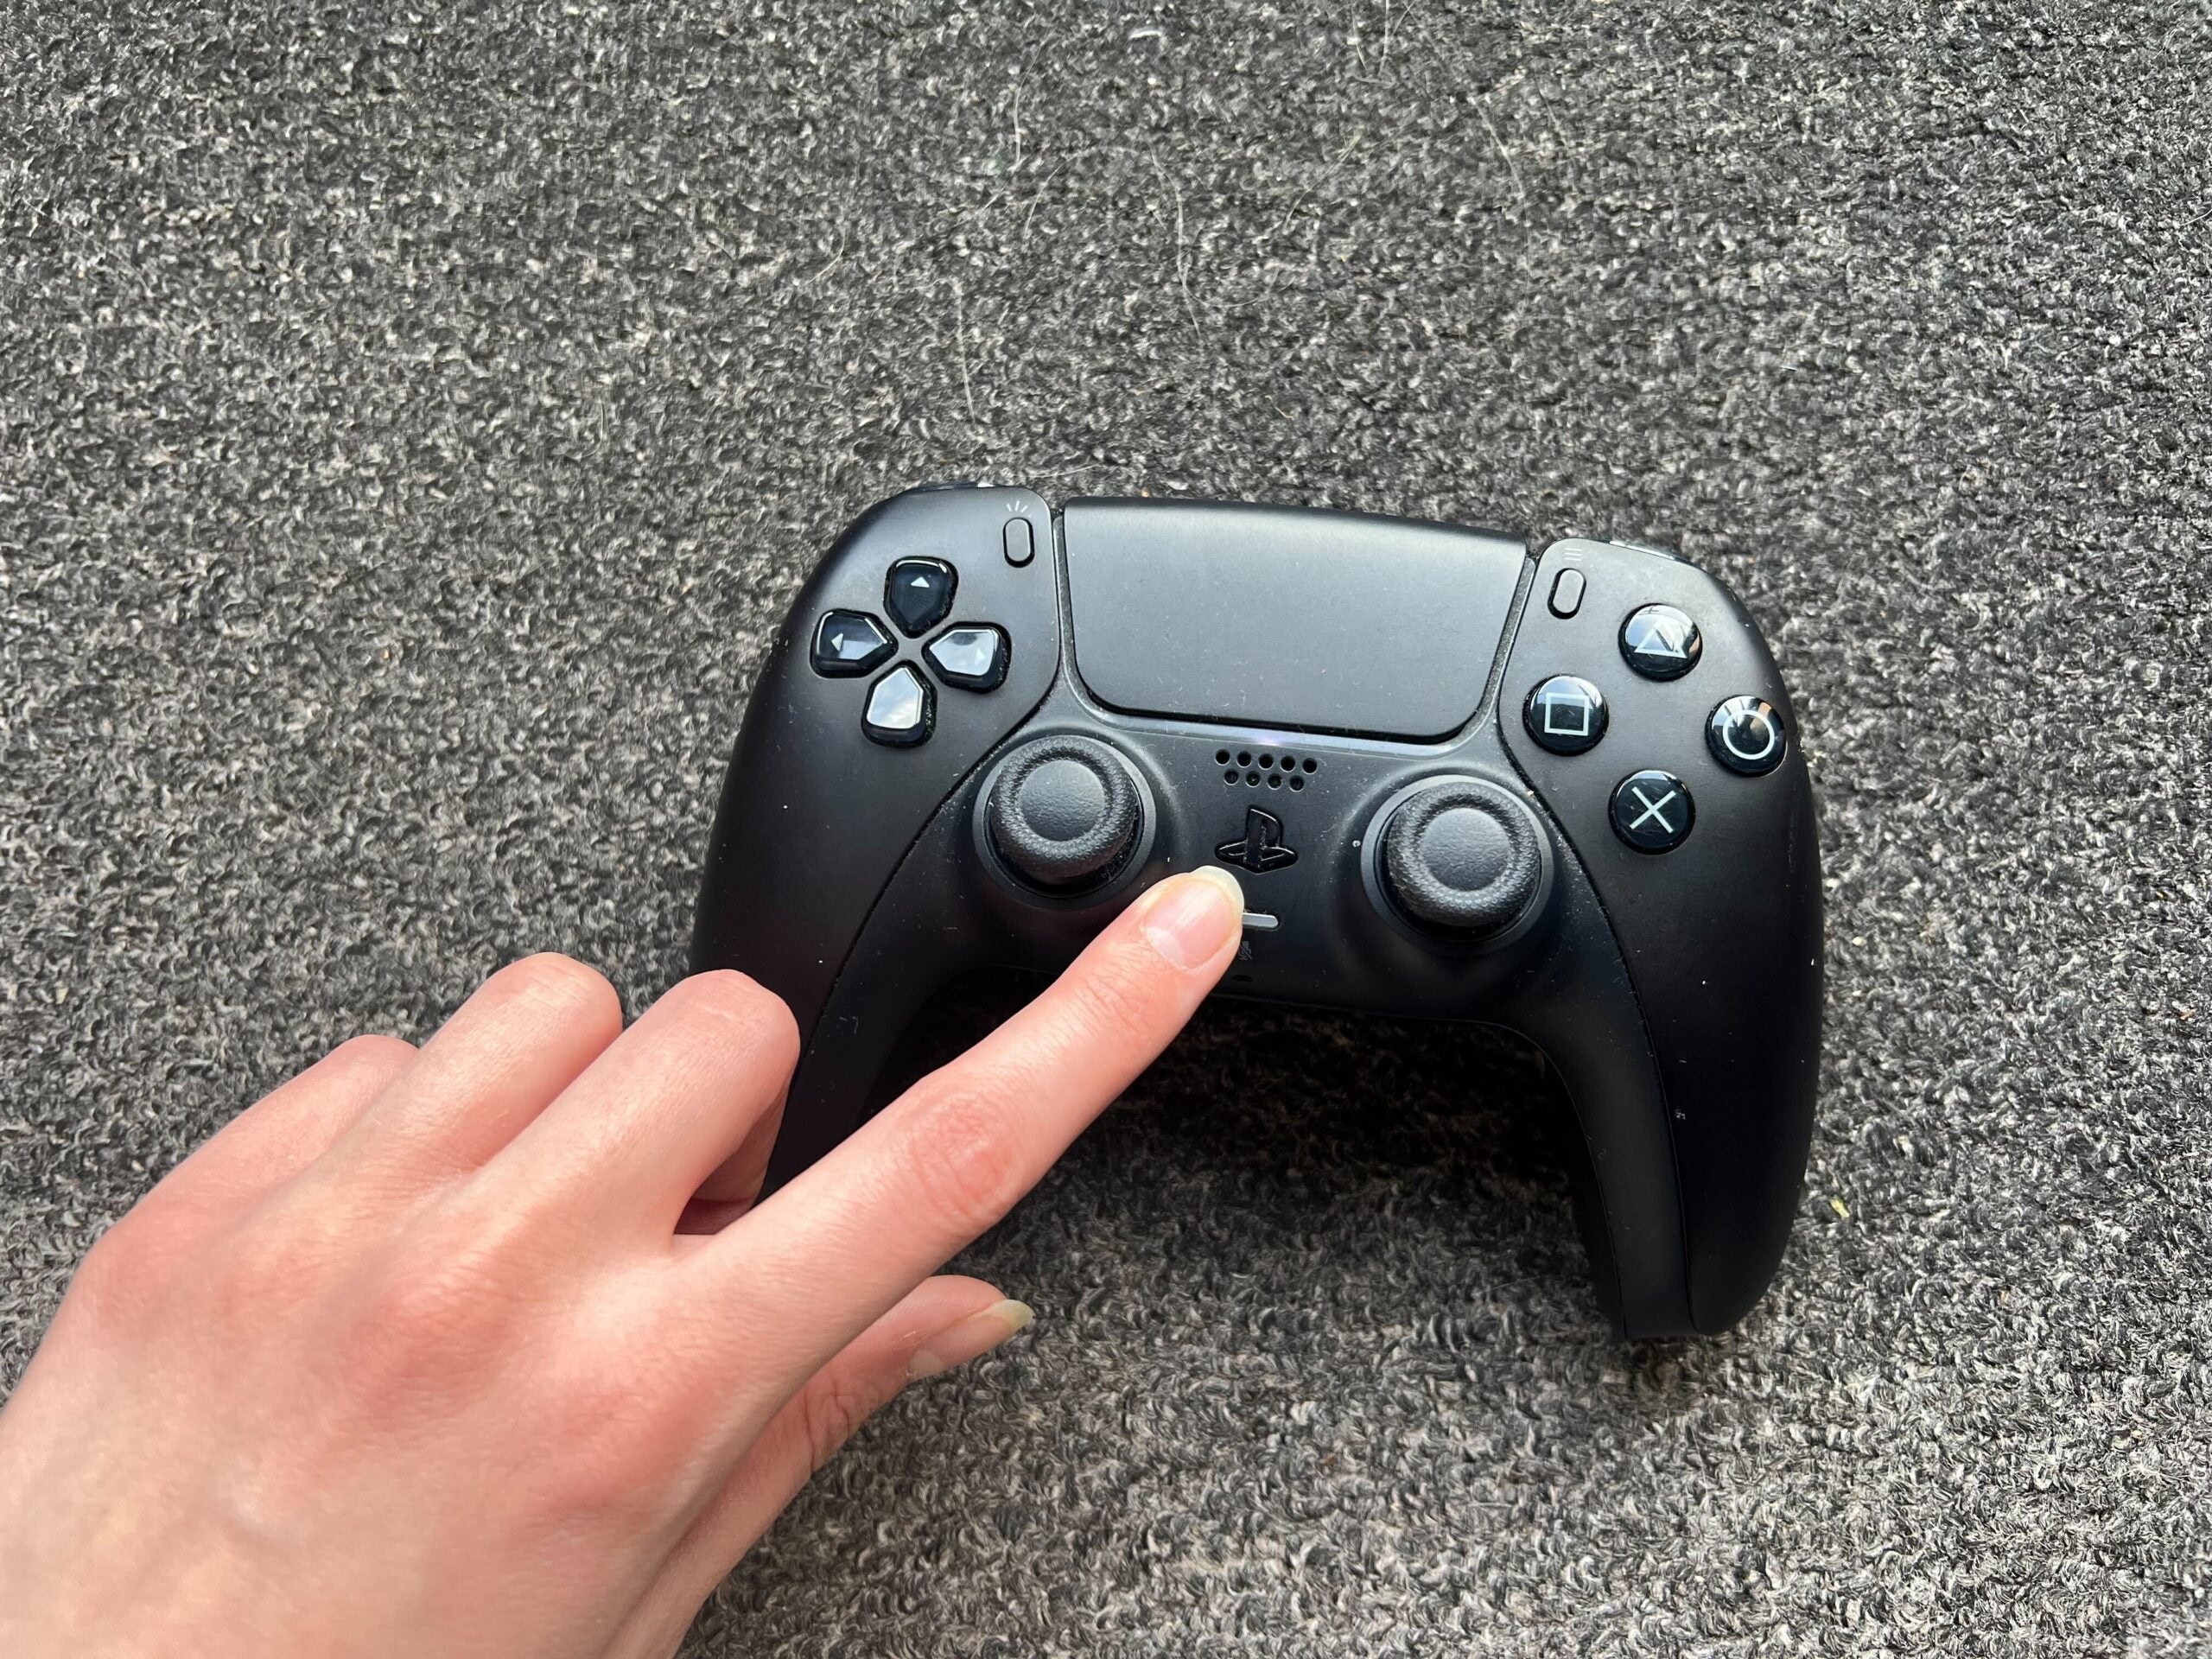 Press the PS button to play